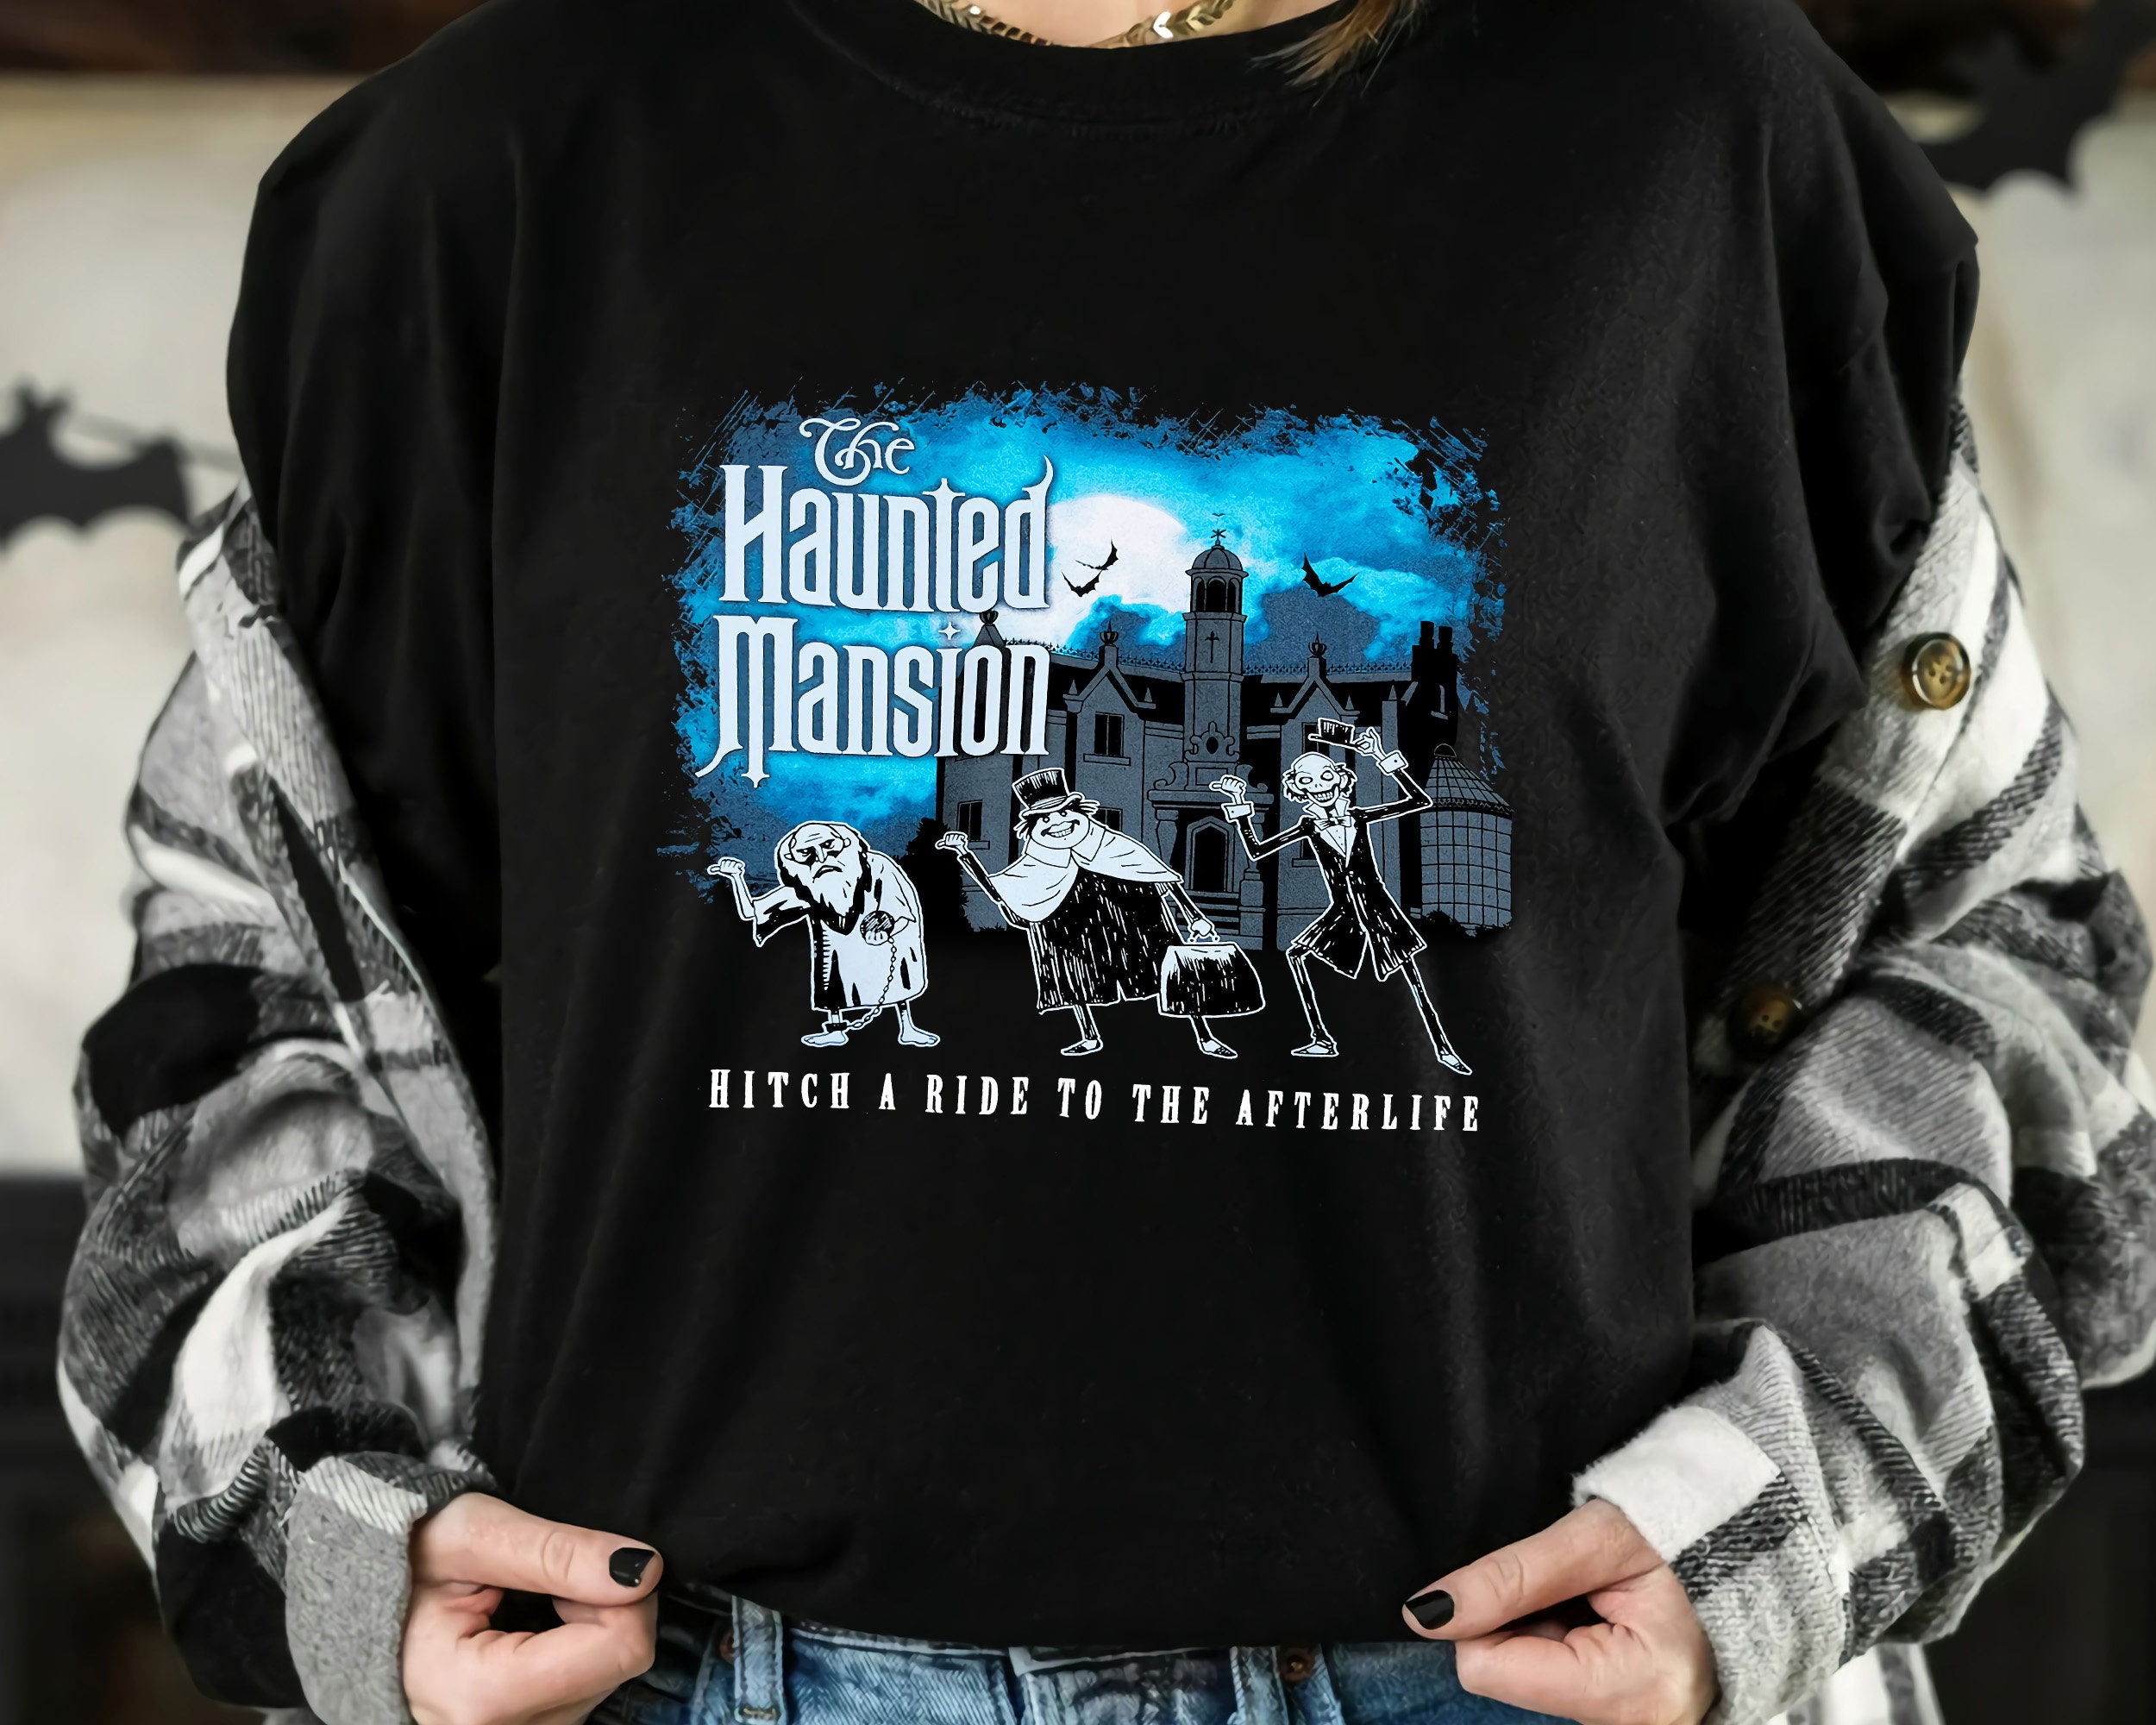 Hitch A Ride To The Afterlife Hitchhiking Ghosts Sweatshirt, Disney The Haunted Mansion T-shirt